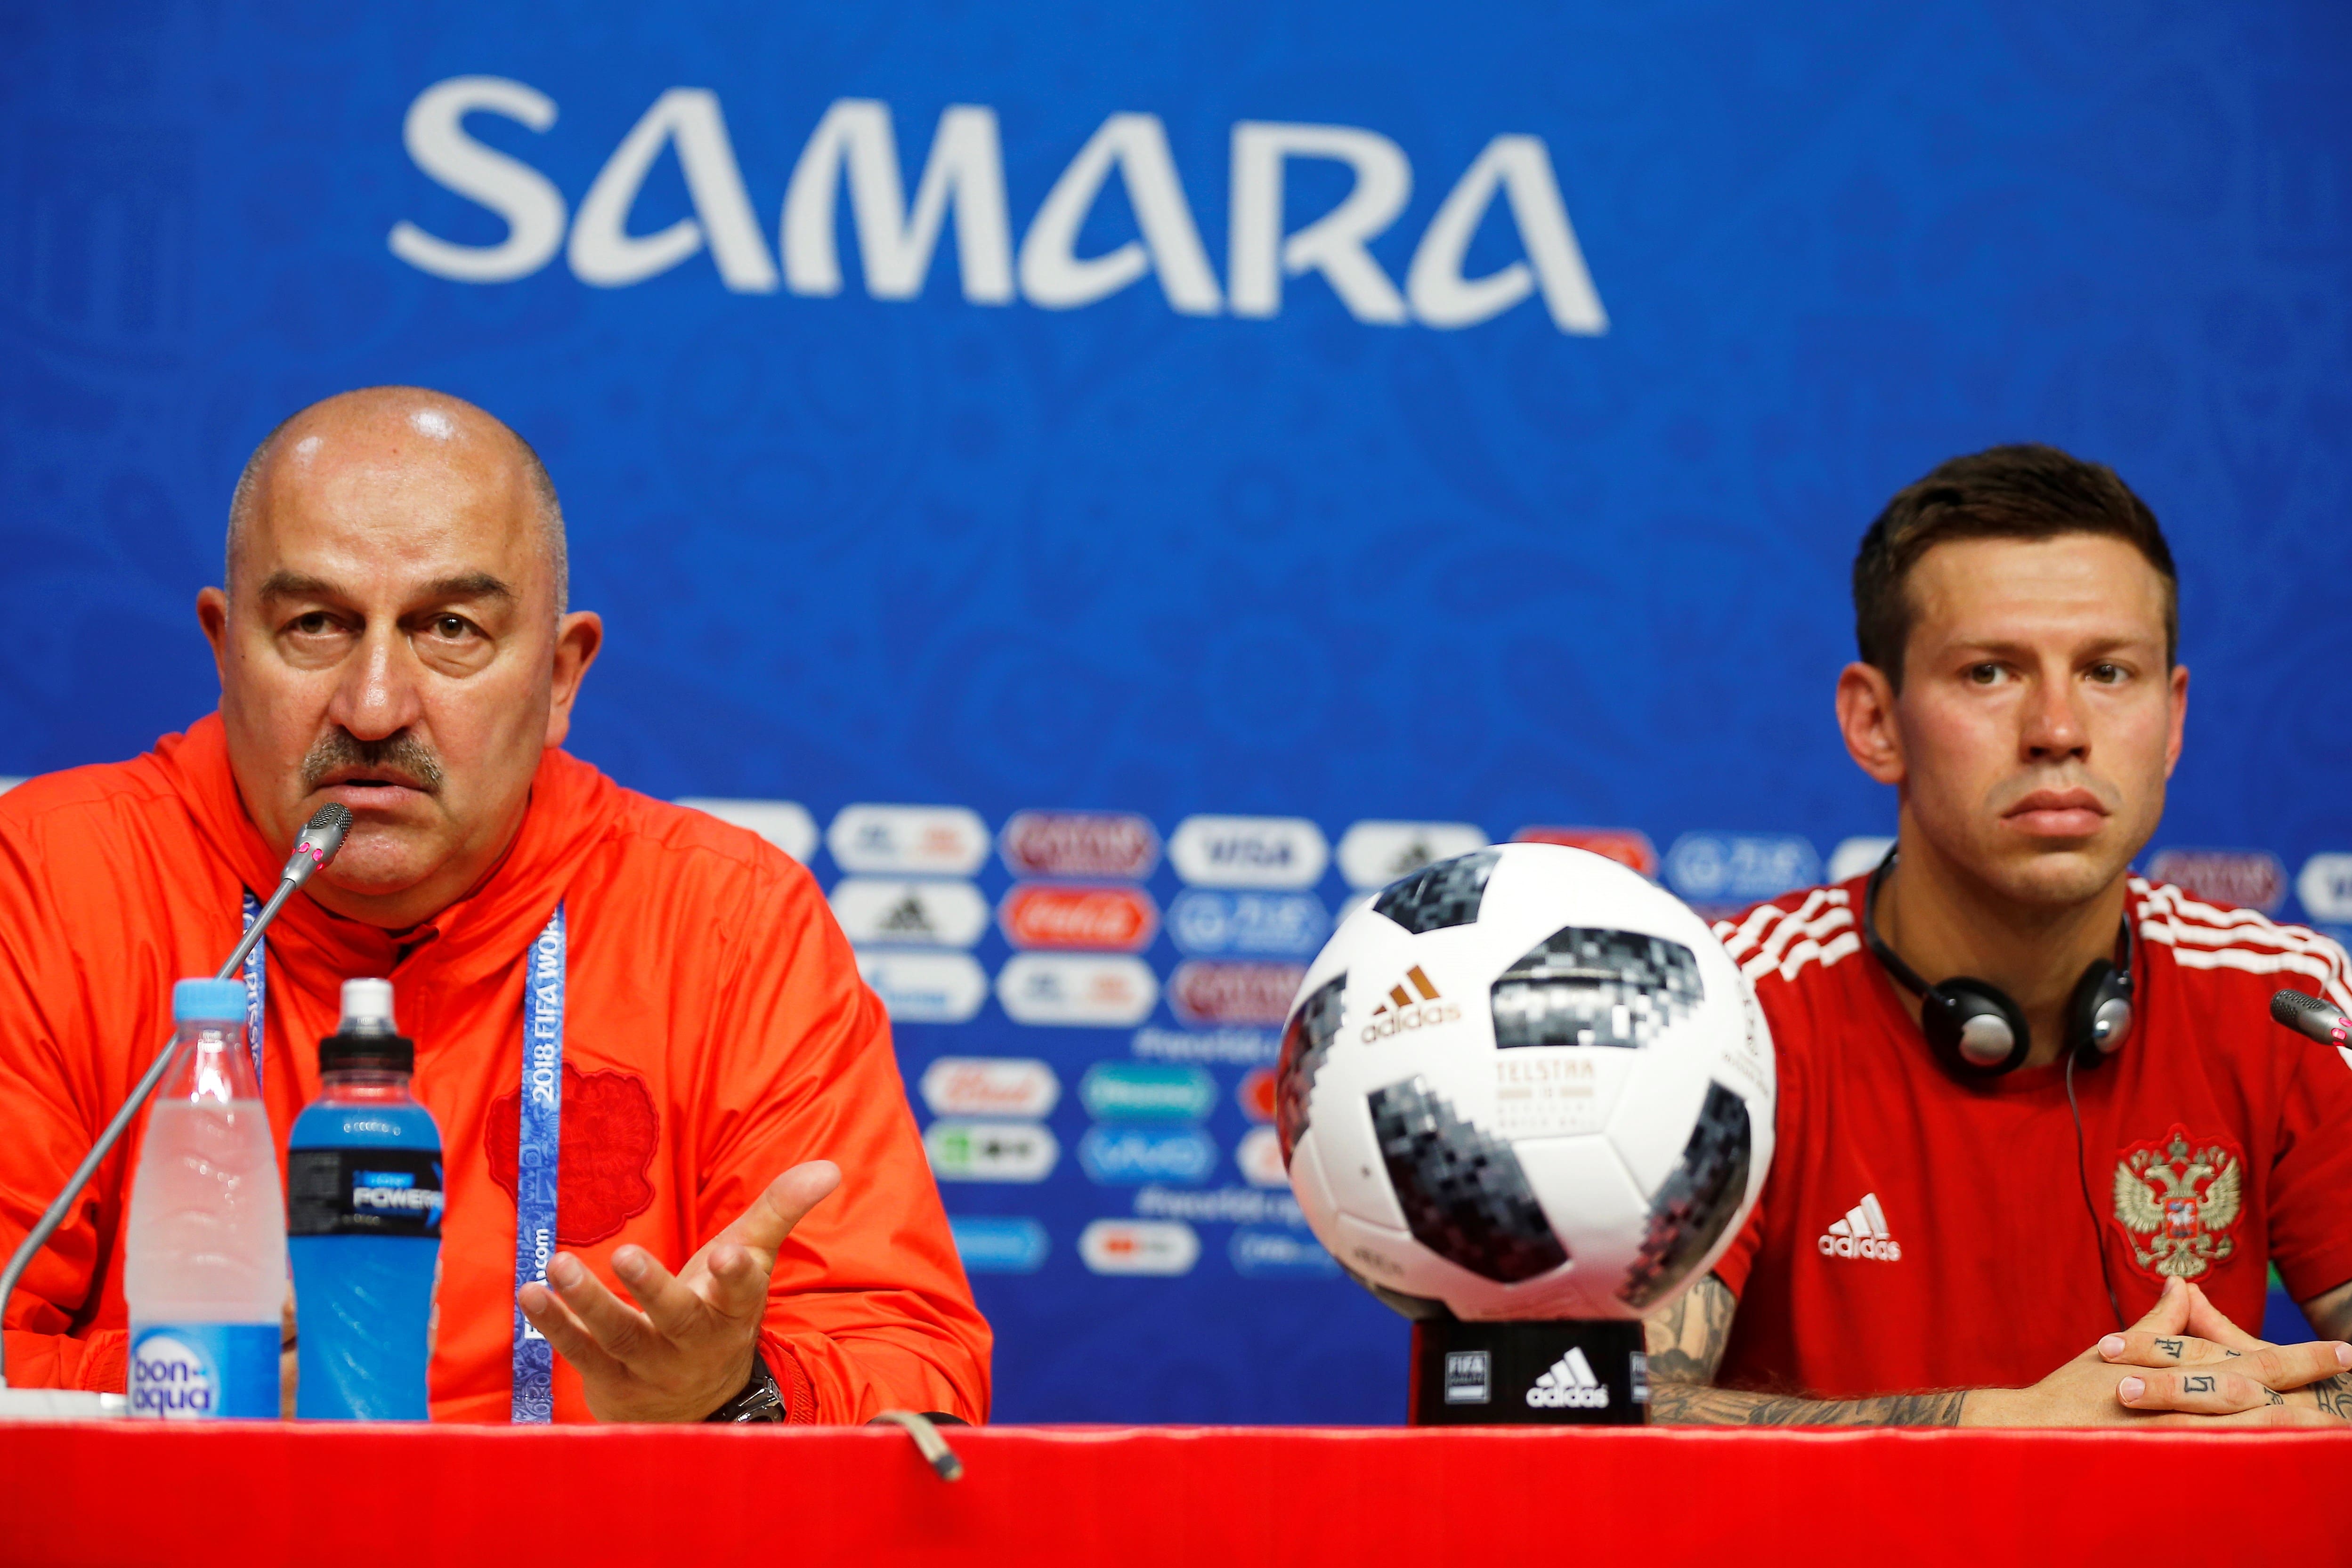 FIFA World Cup 2018: Russia coach Stanislav Cherchesov says aiming to finish 1st in group regardless of last 16 rival